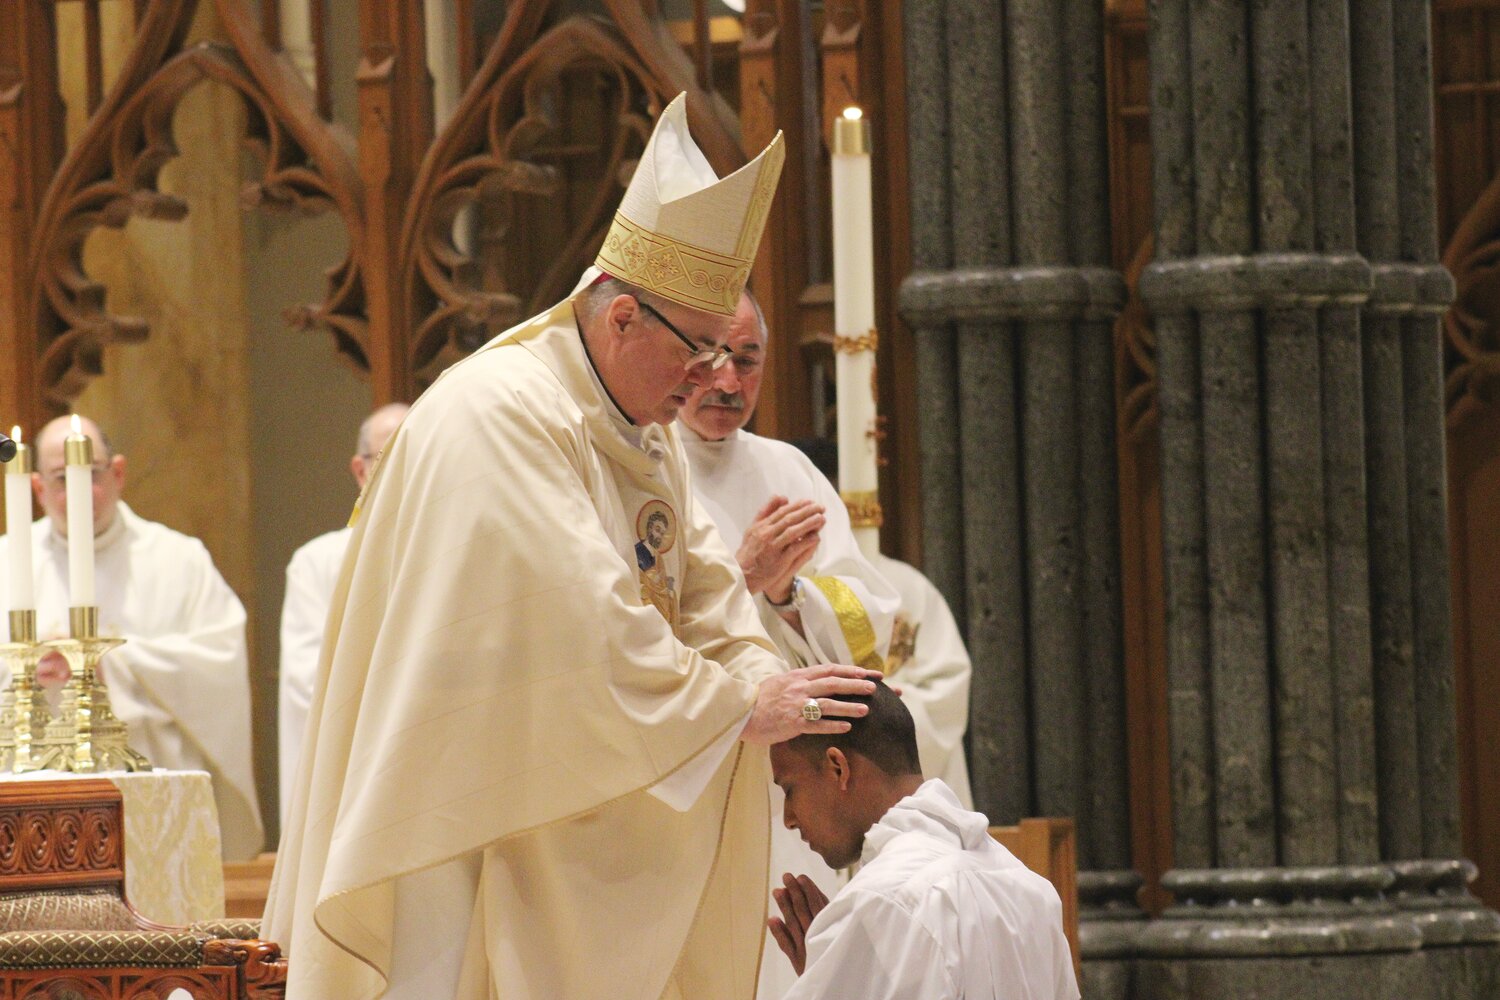 Bishop Richard G. Henning lays his hands upon the head of Providence Seminarian Jairon Olmos Rivera, ordaining him to the transitional diaconate on May 13 at the Cathedral of SS. Peter and Paul, Providence.